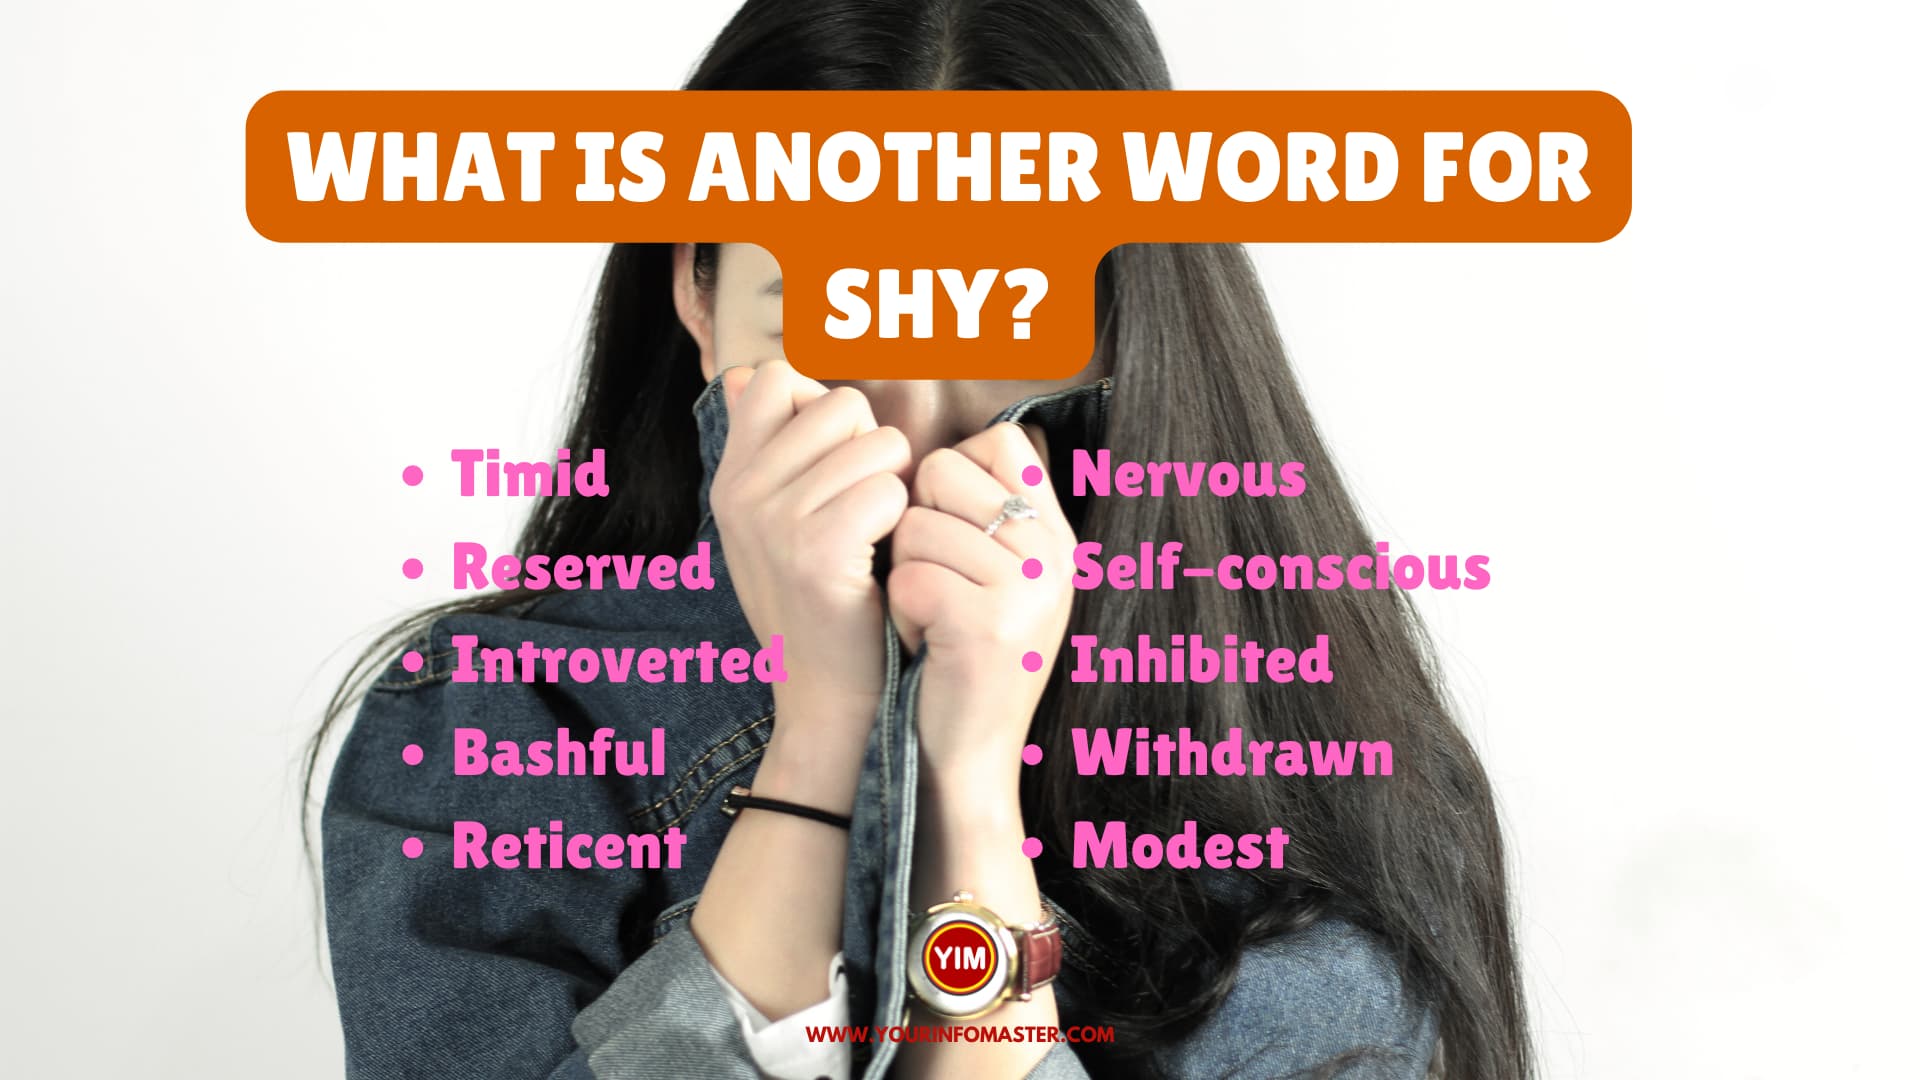 What is another word for Shy